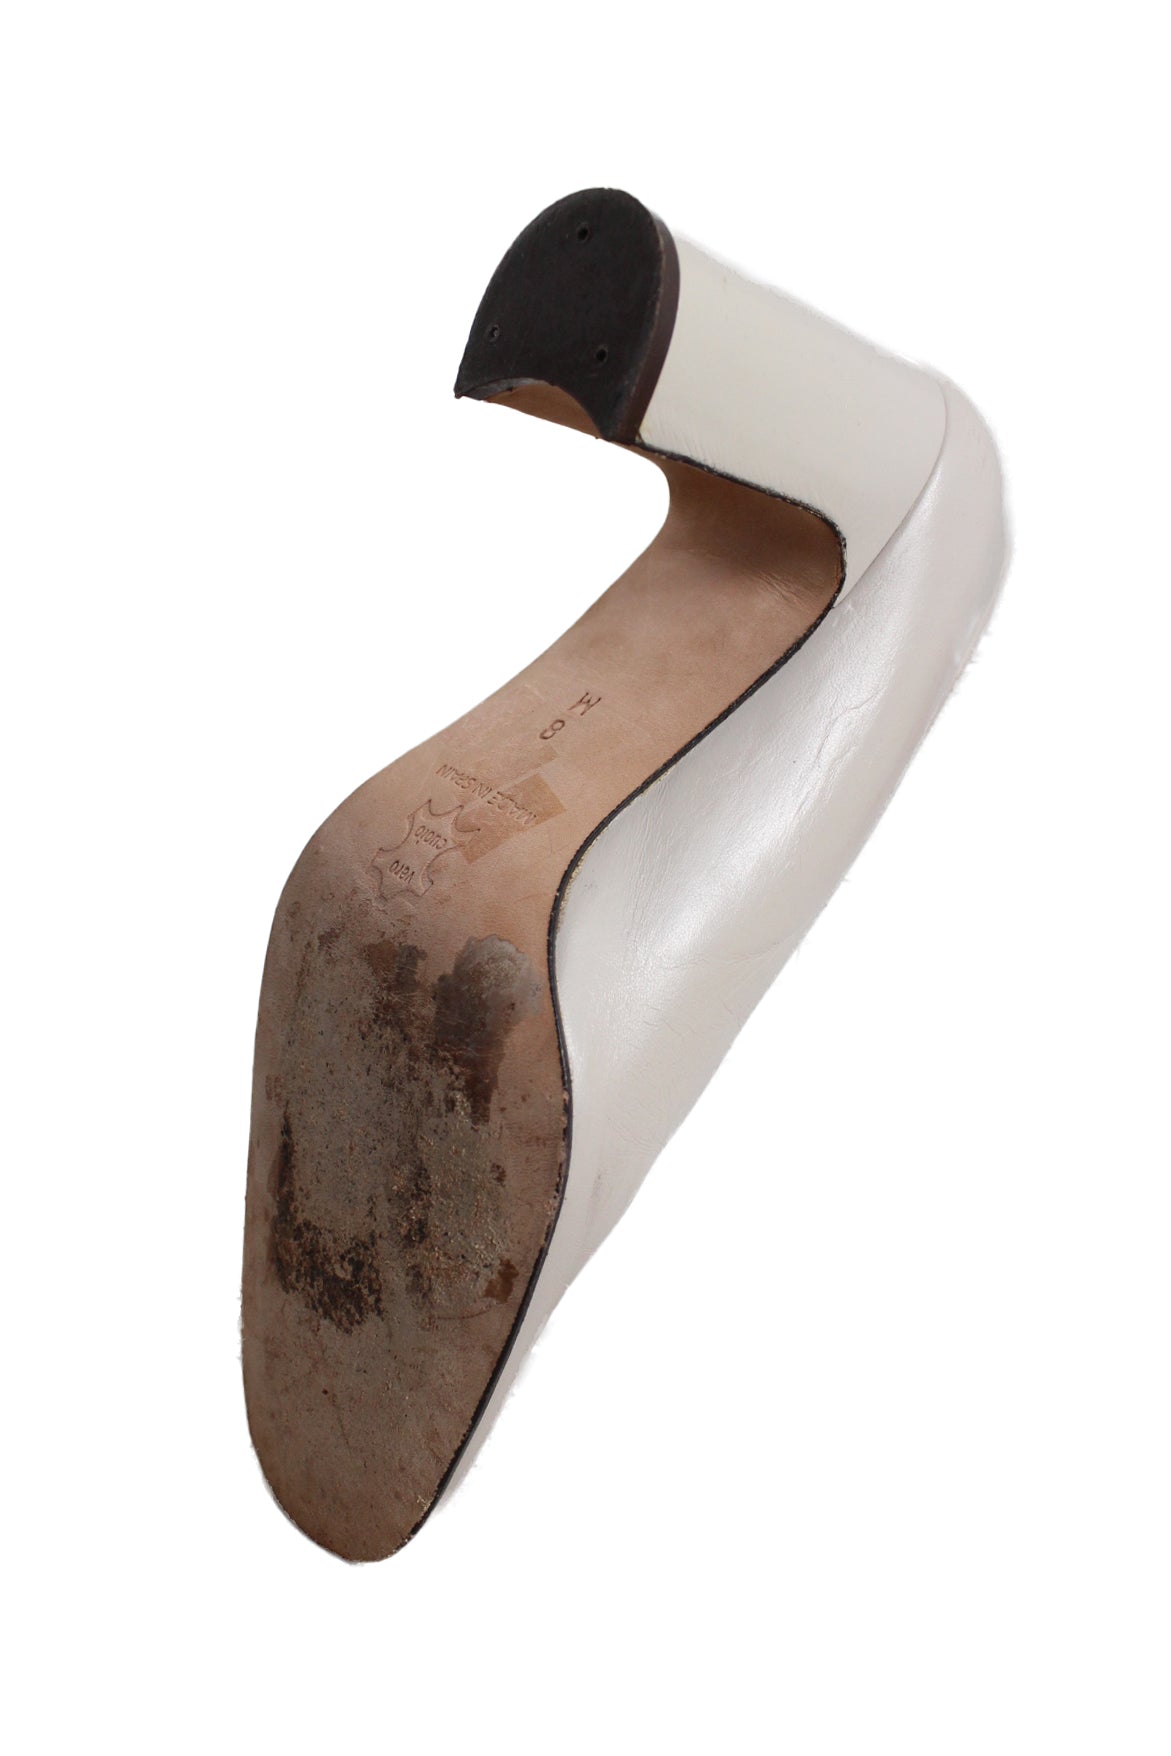 sole angle of pump. features leather sole, plastic covered heel tap, and text '8 m, vero cuoio, made in spain'.